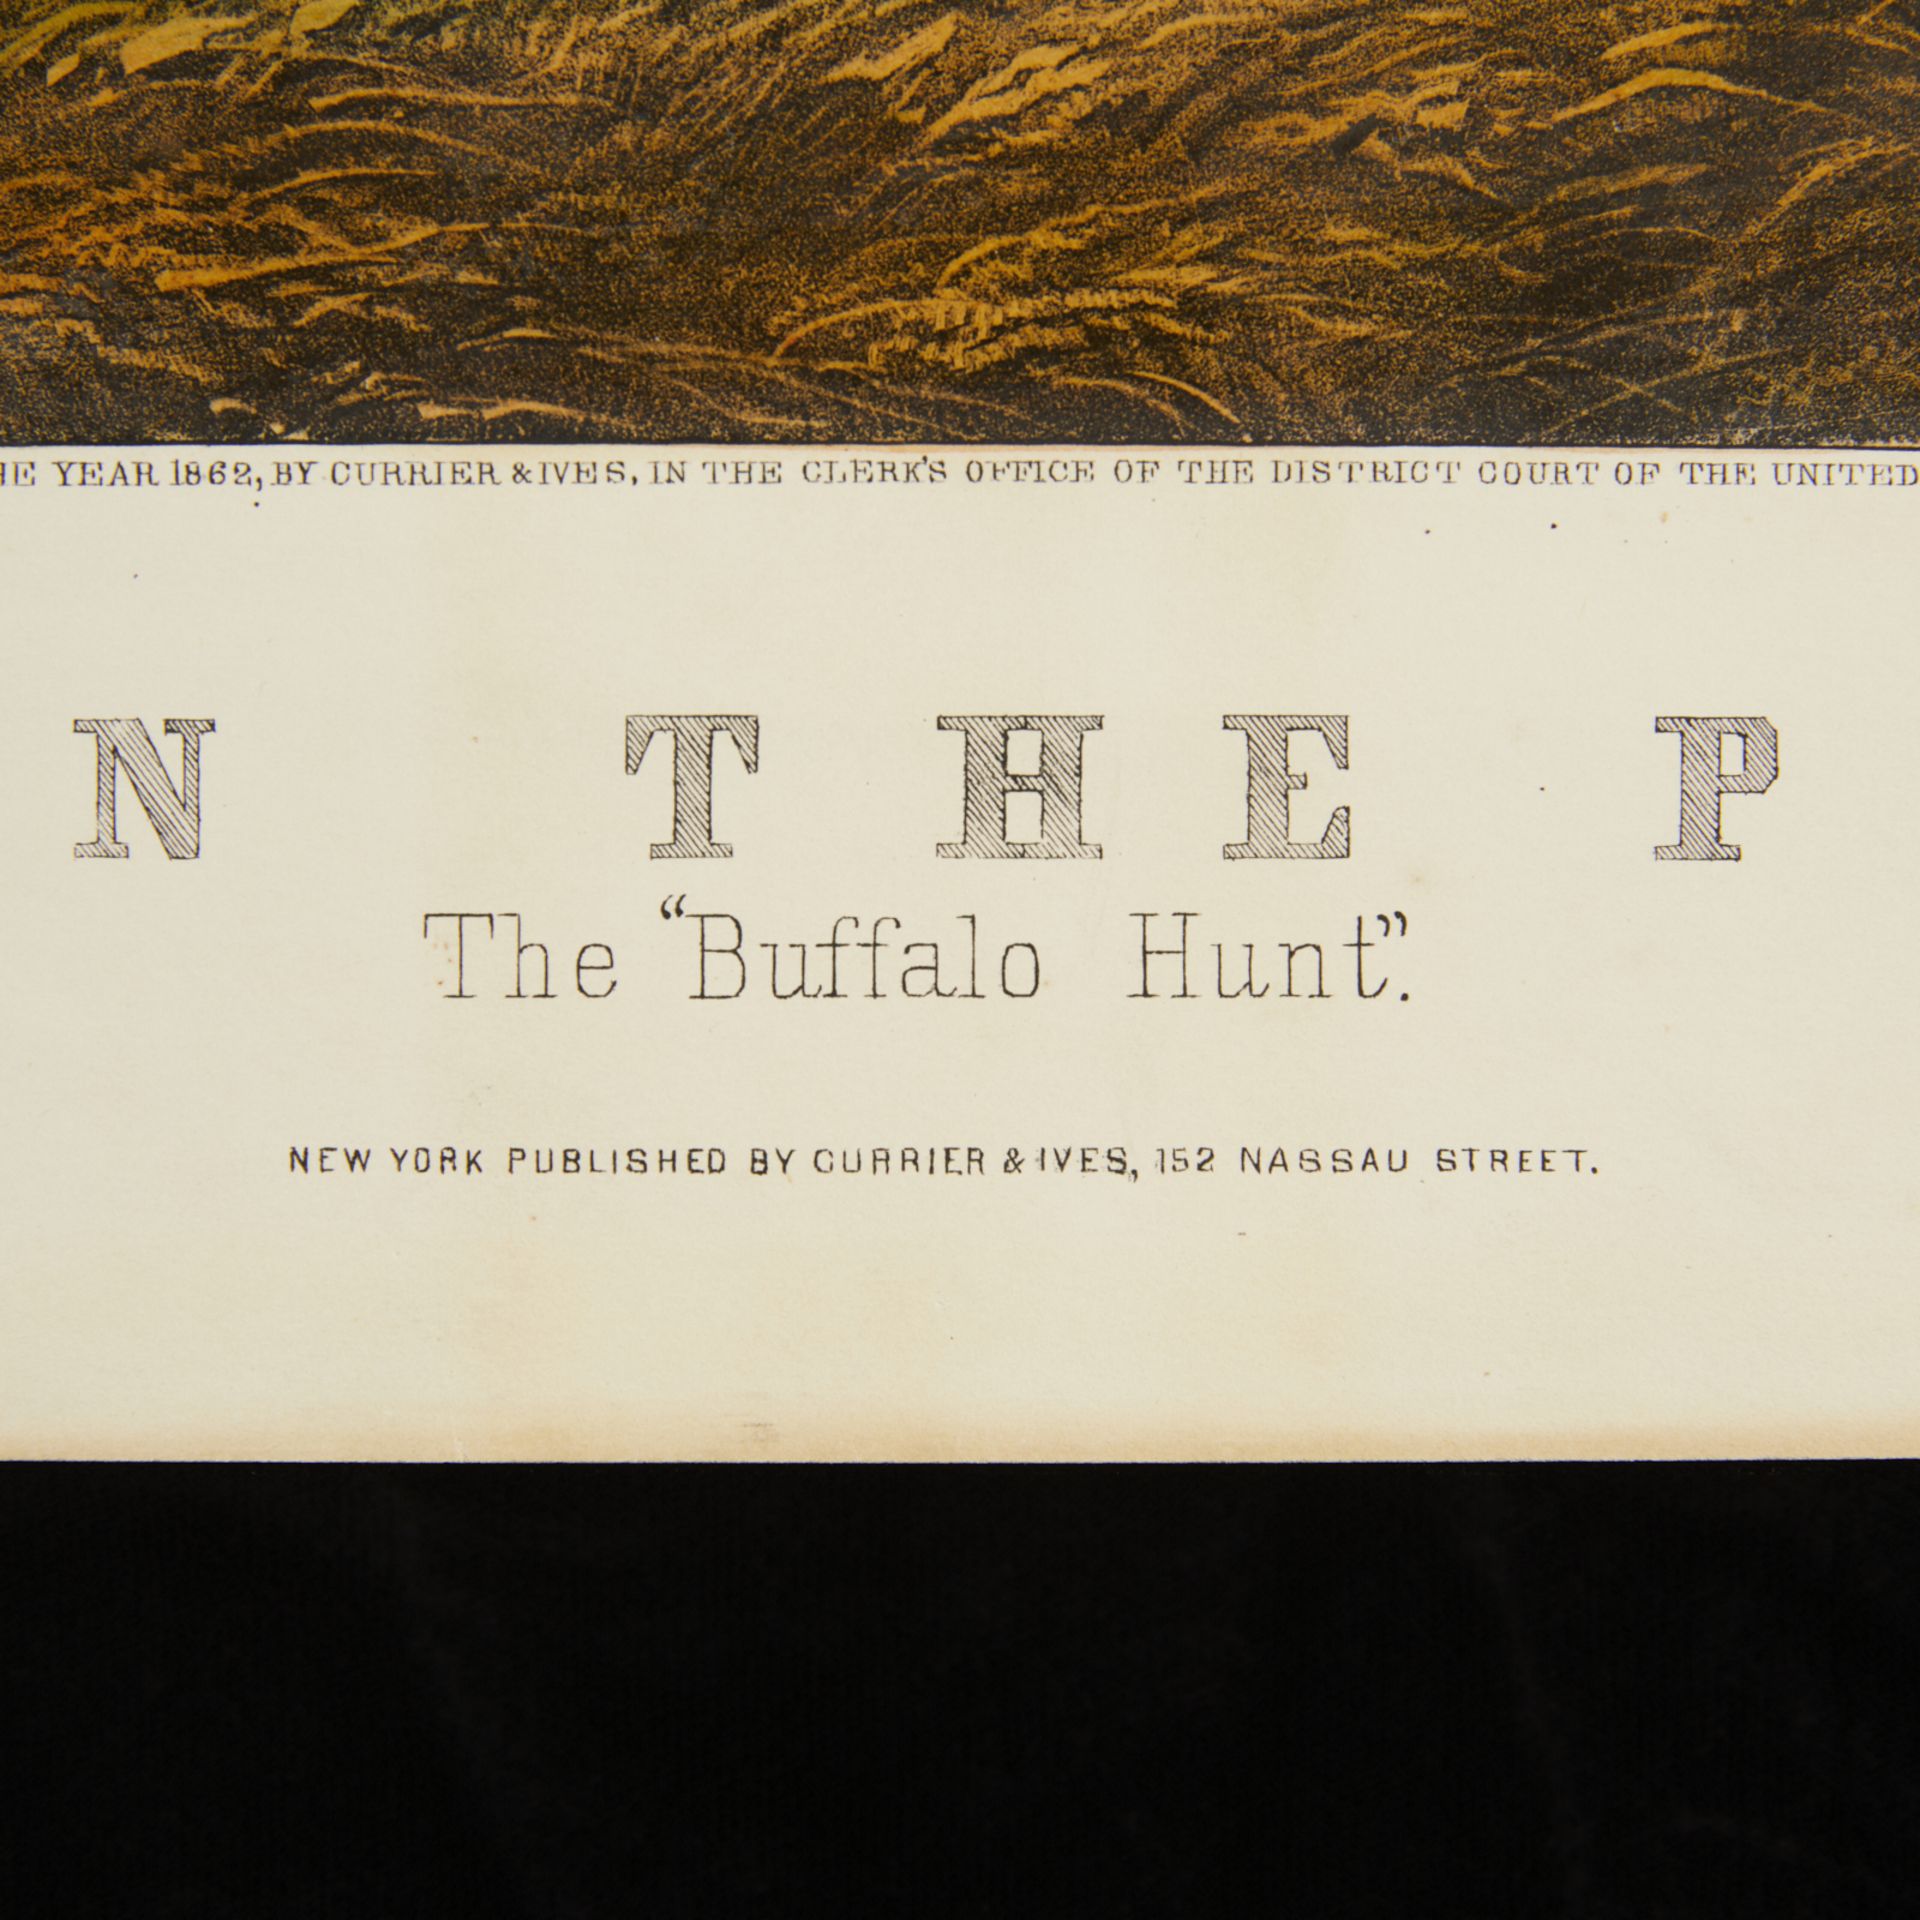 Currier & Ives "The Buffalo Hunt" Print 1862 - Image 9 of 10